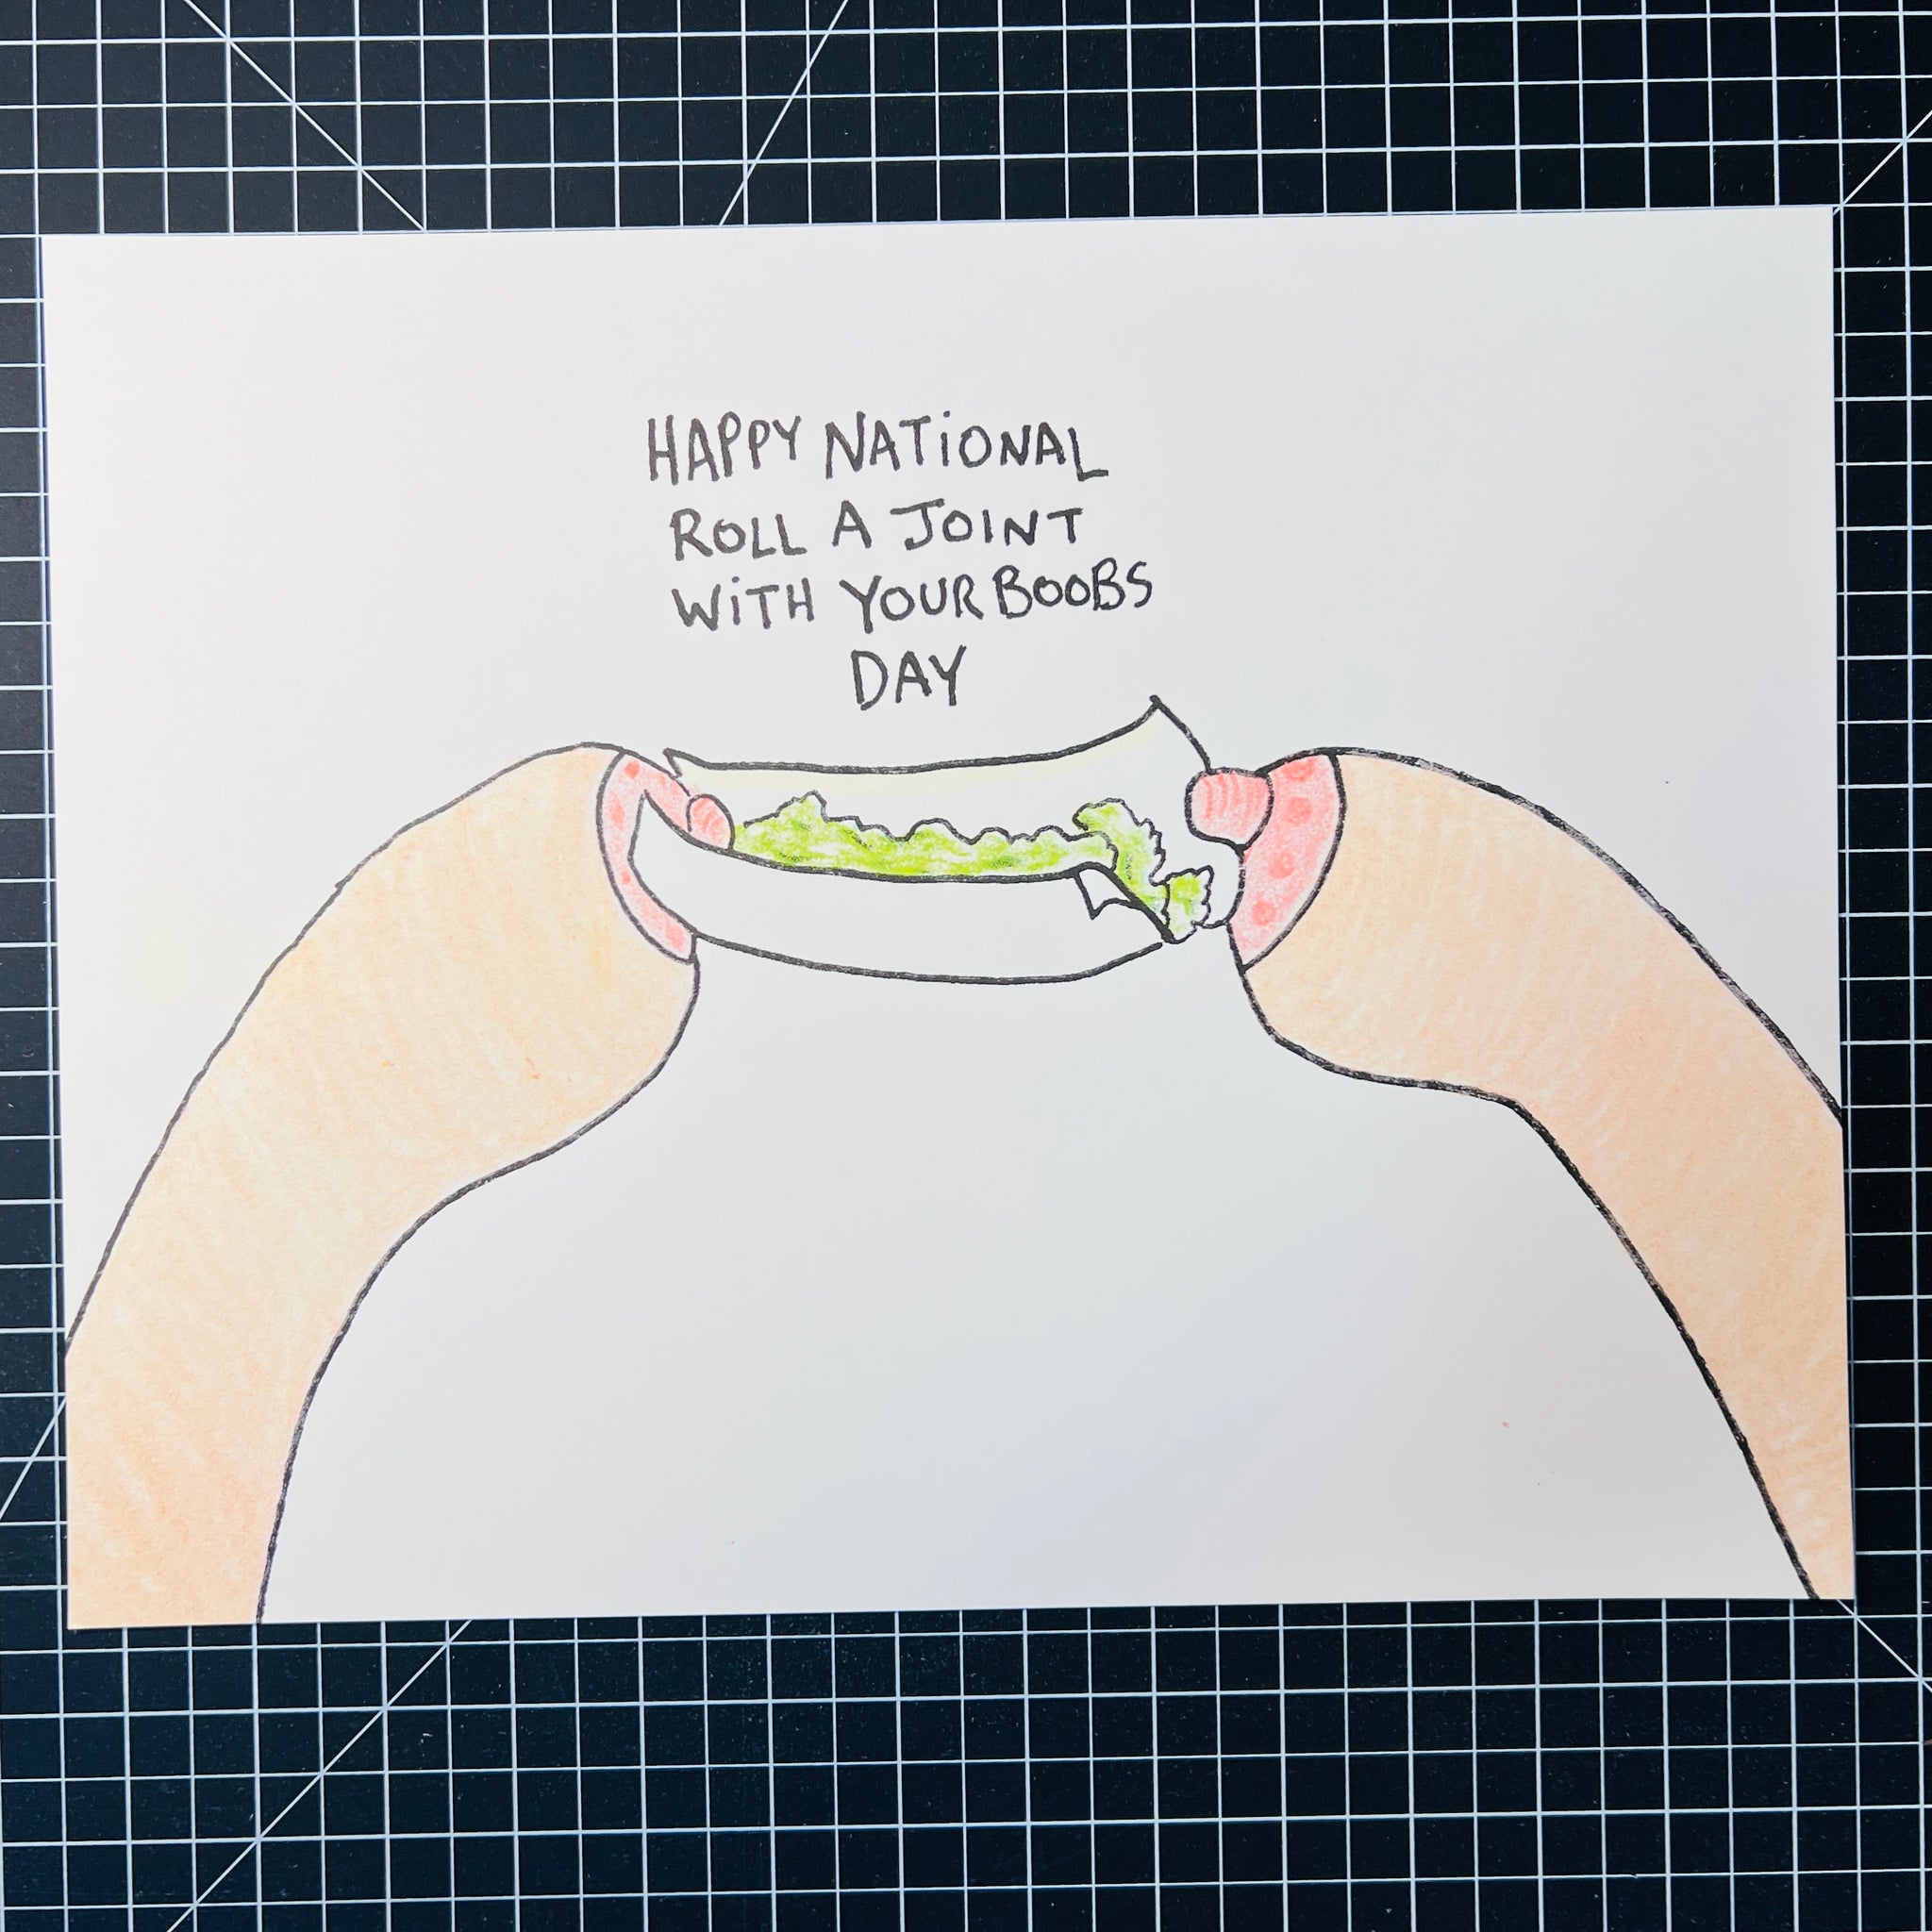 HAPPY NATIONAL ROLL A JOINT WITH YOUR BOOBS DAY 11X14 PRINT